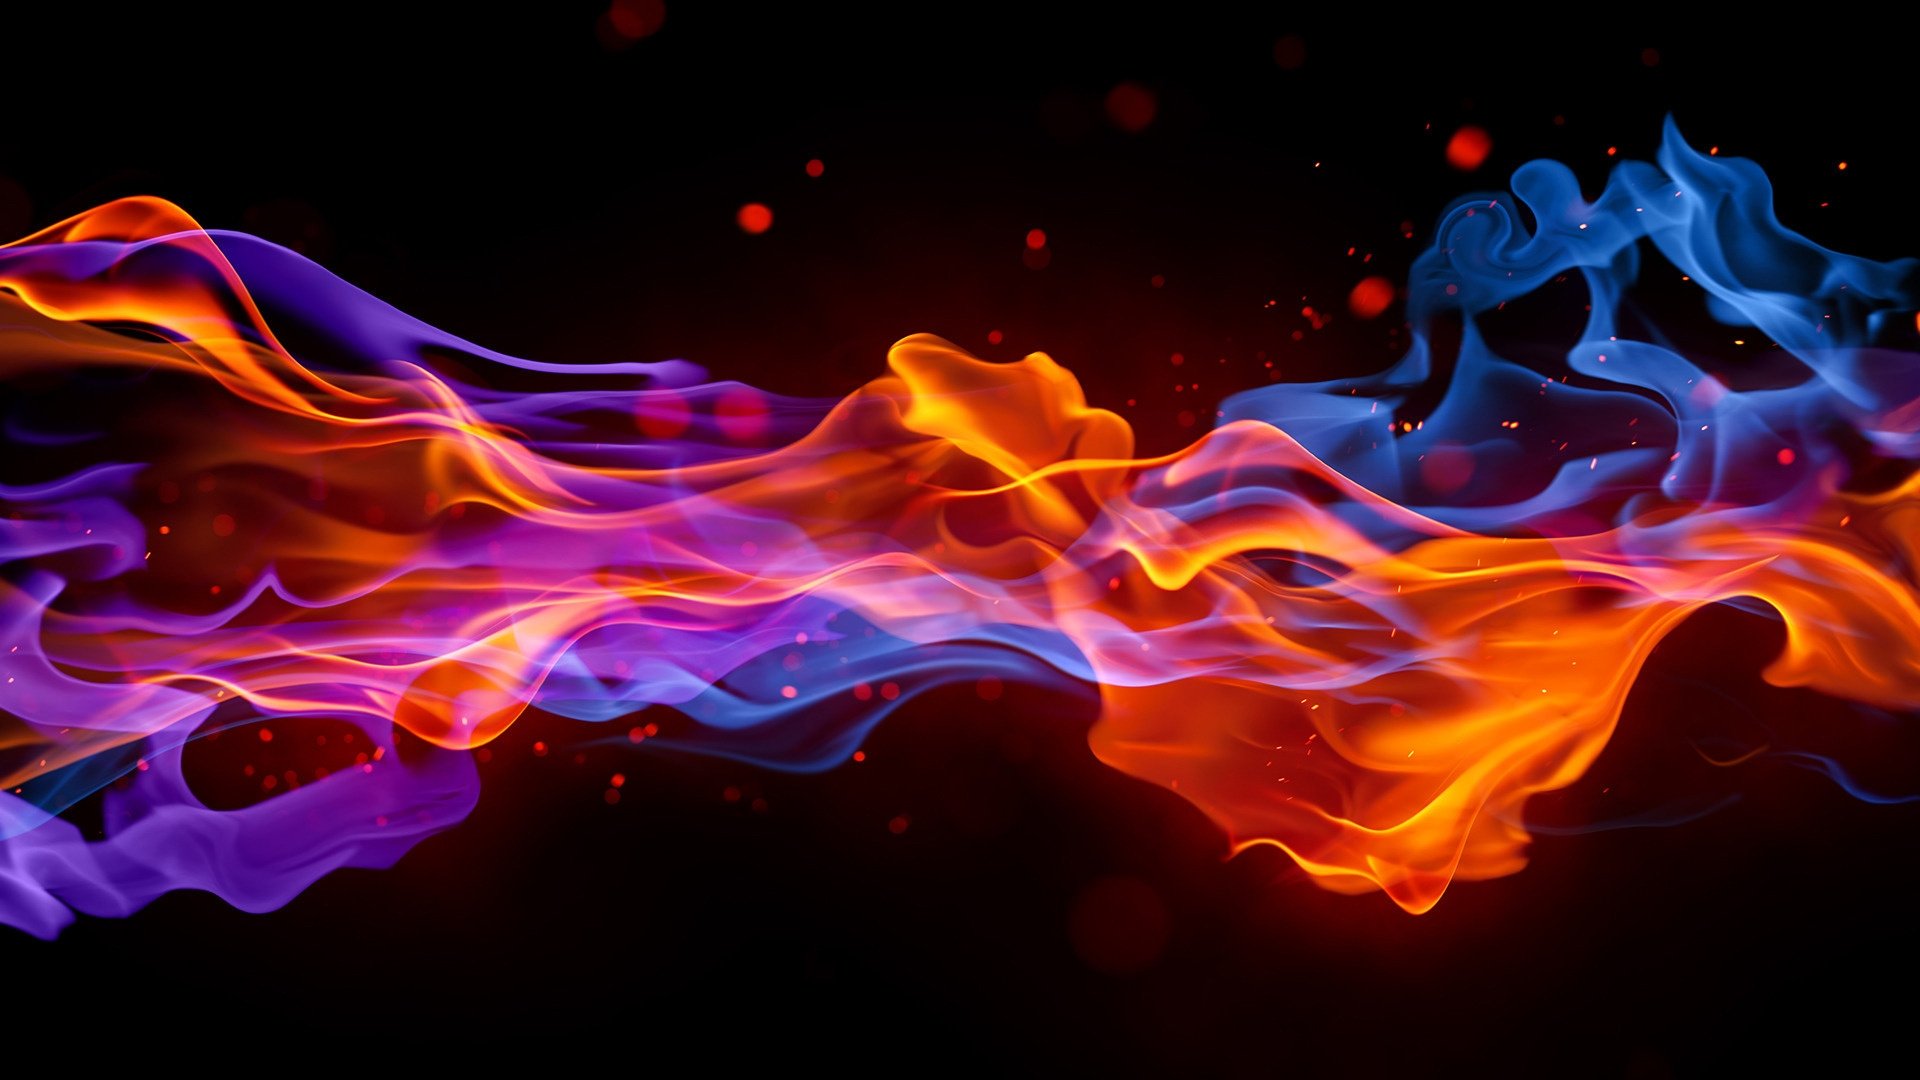 47 Fire 3D Wallpapers and Backgrounds  WallpaperSafari